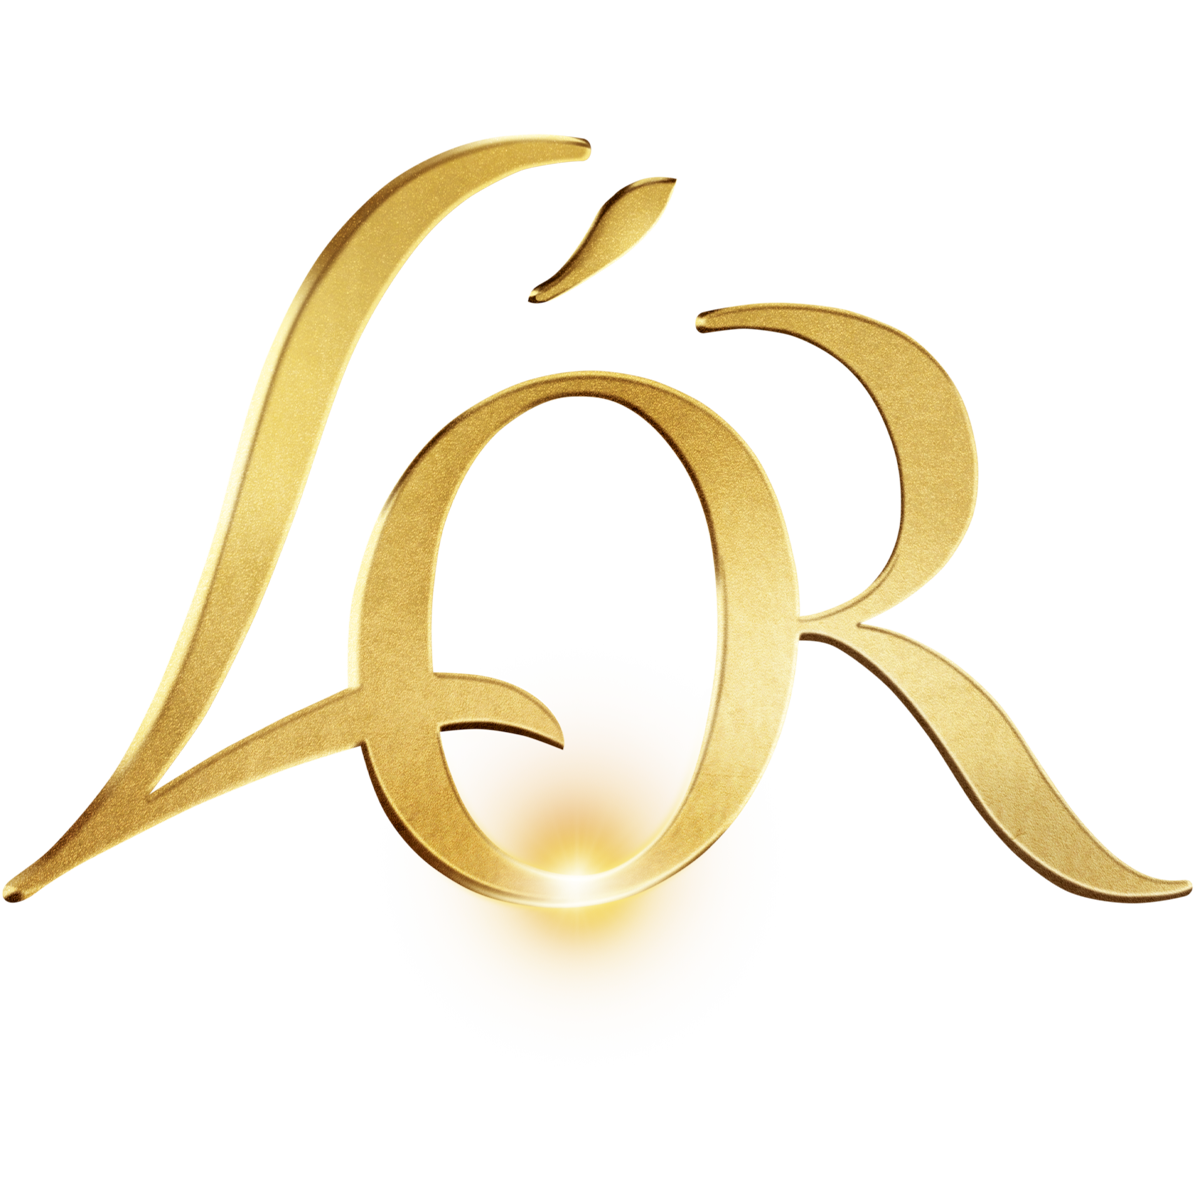 L'or